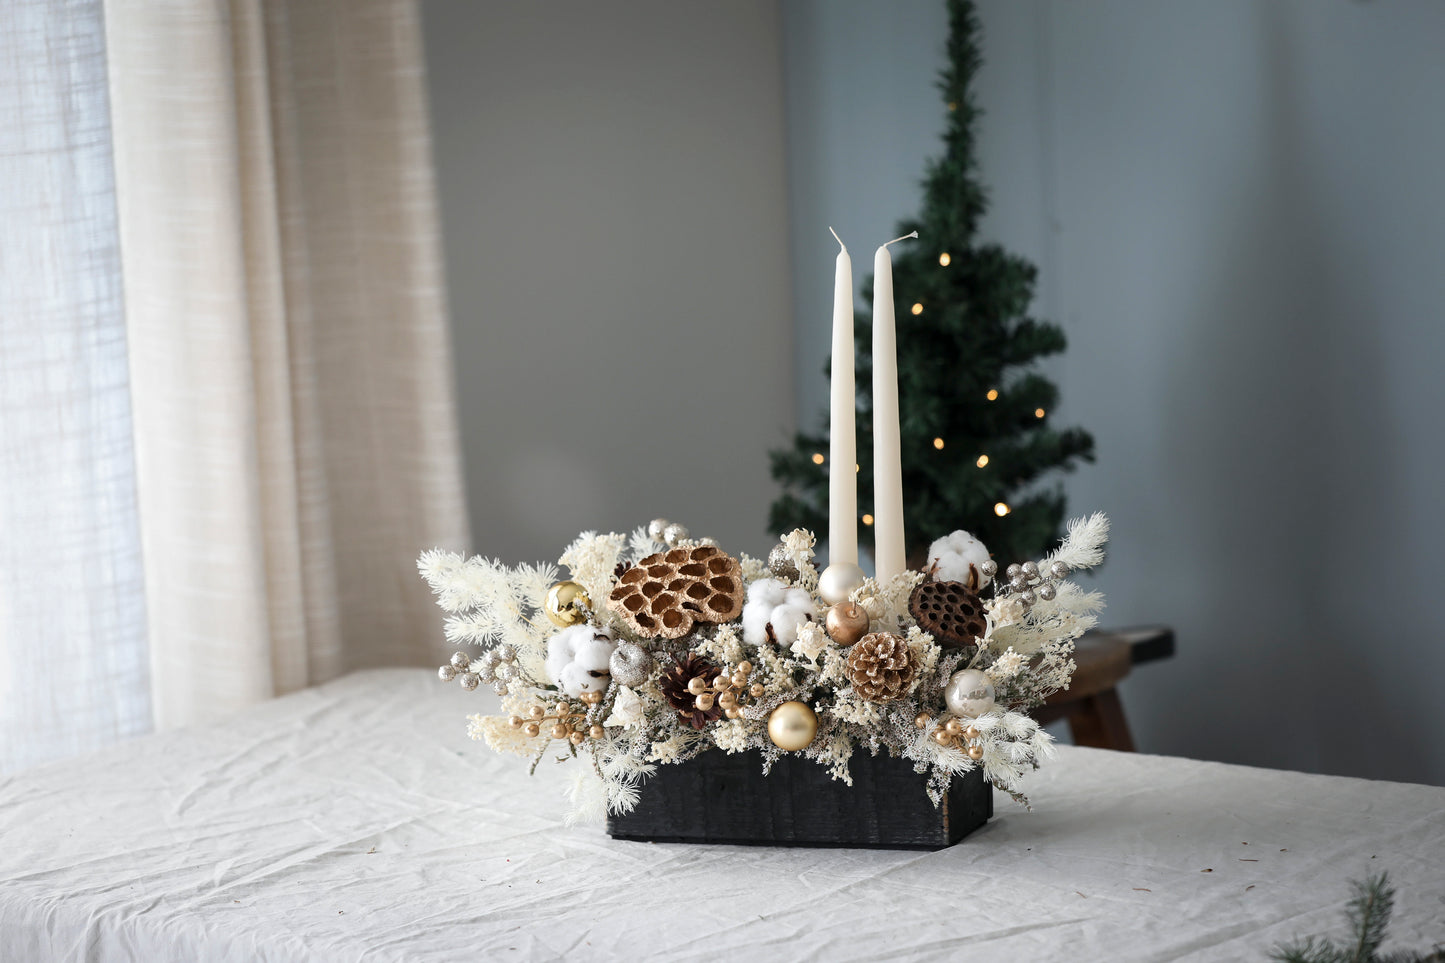 Gold & White Ornaments Candle Centerpiece